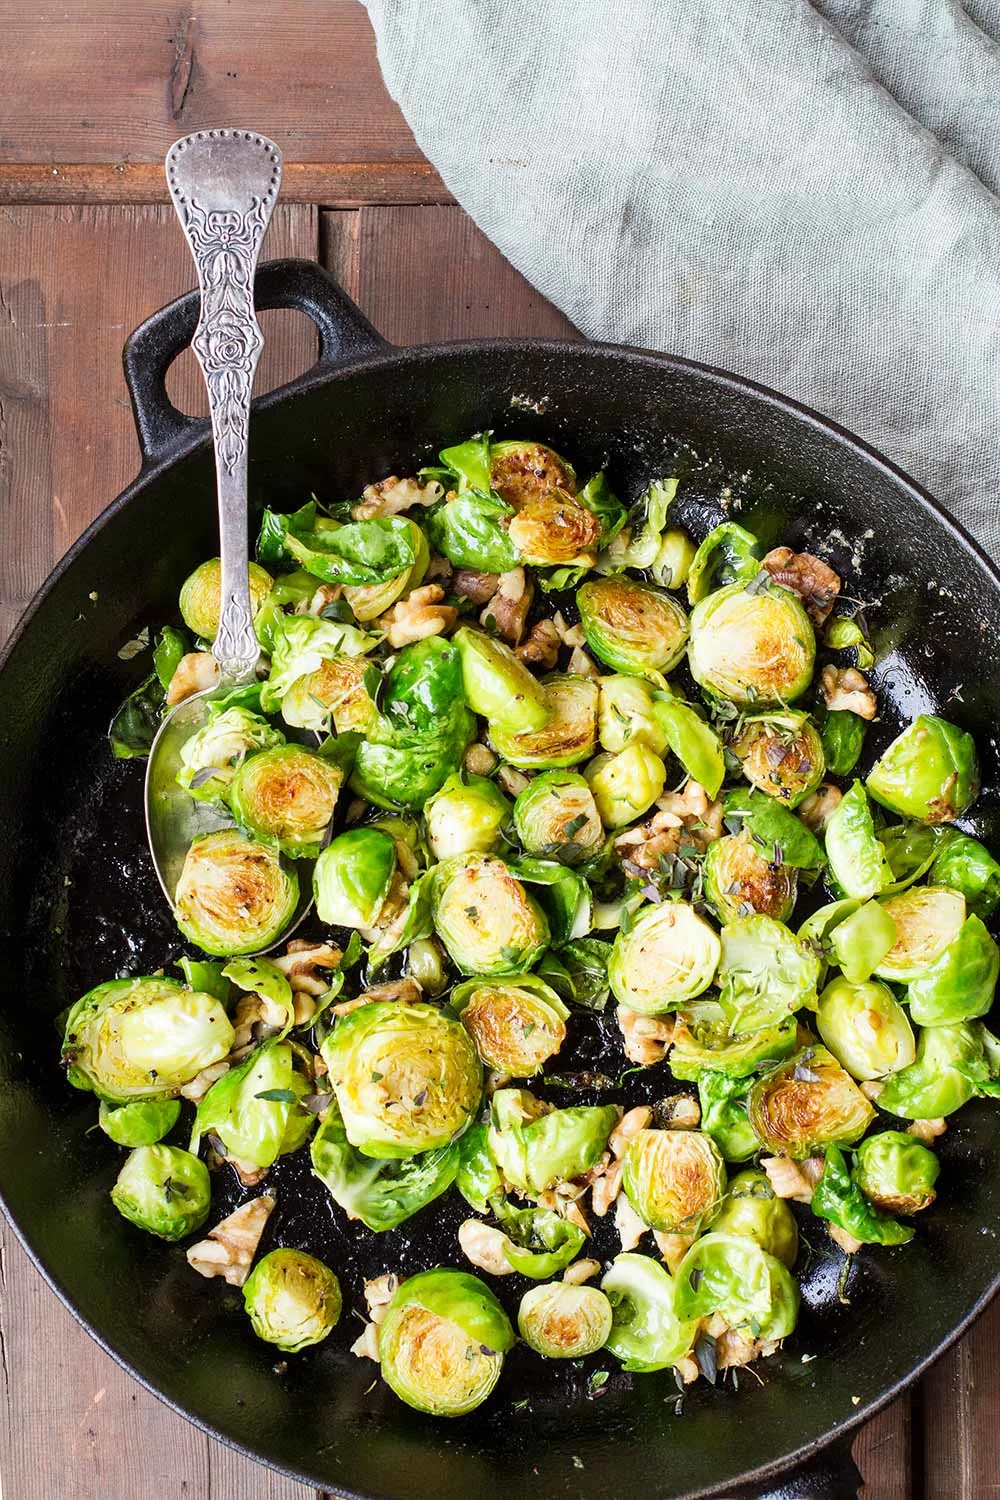 Cast iron skillet with crispy brussels sprouts and a vintage spoon.